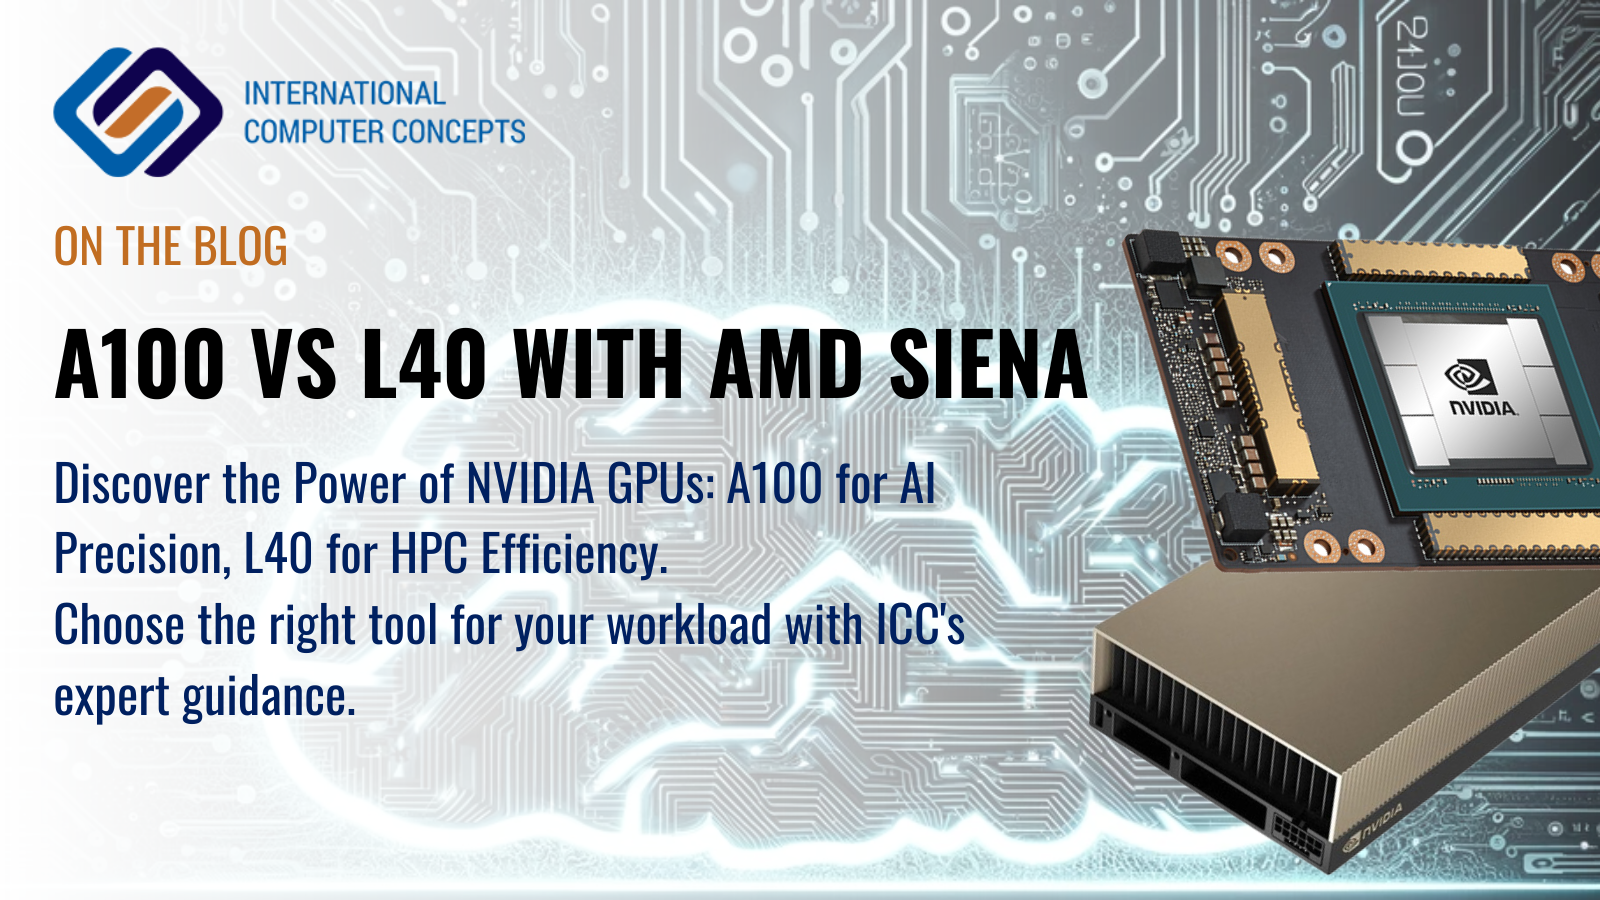 A100 vs L40 with AMD Siena